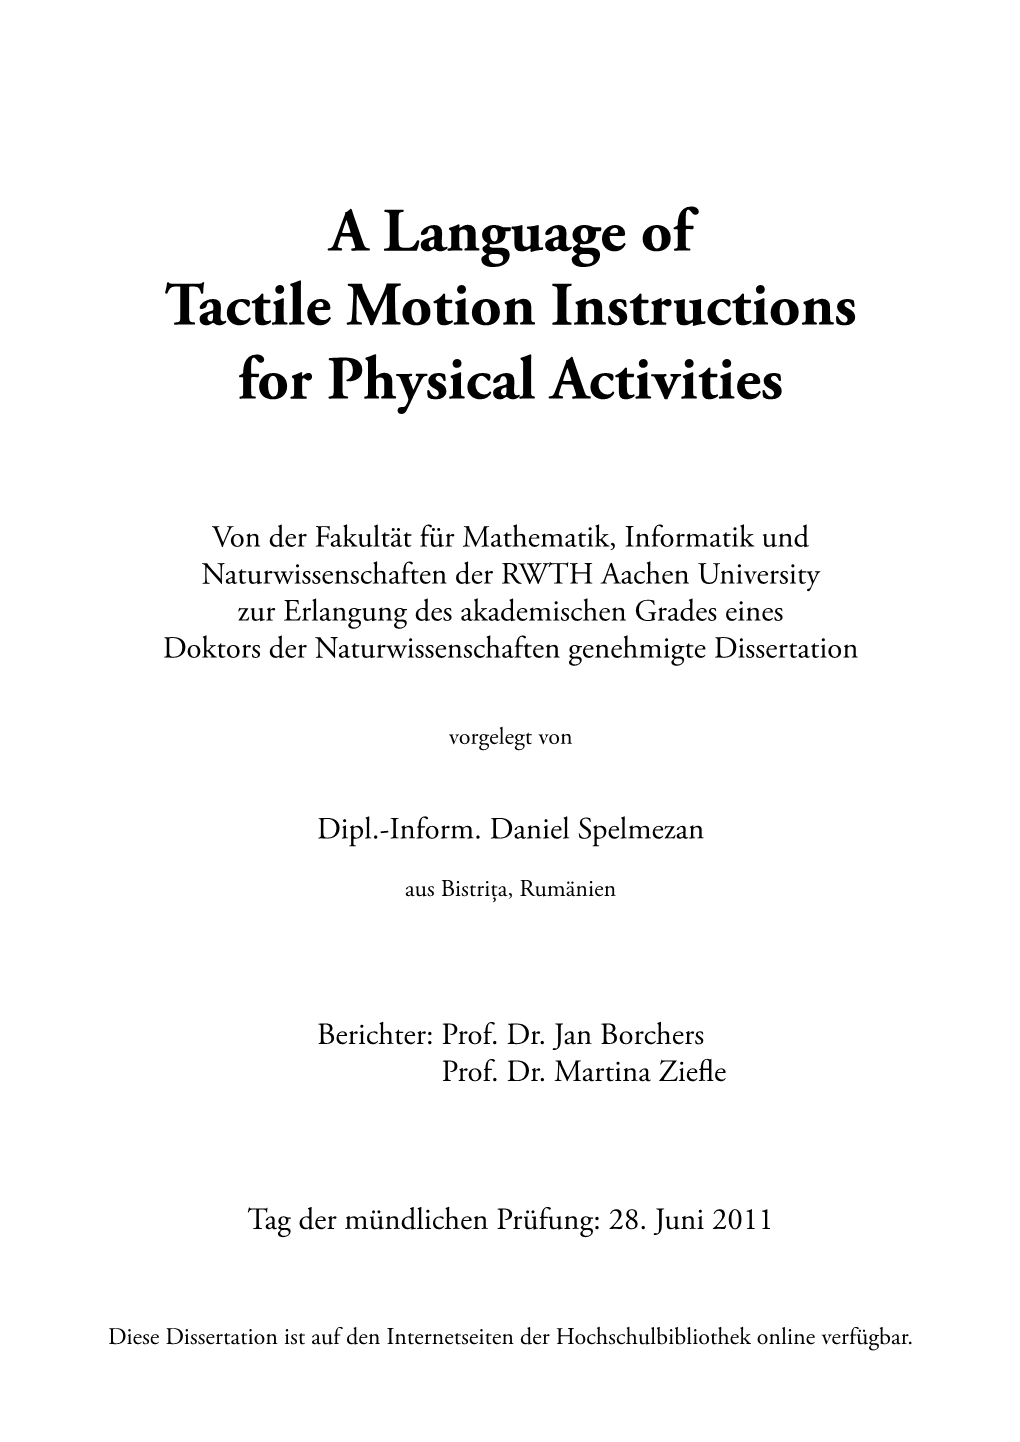 A Language of Tactile Motion Instructions for Physical Activities